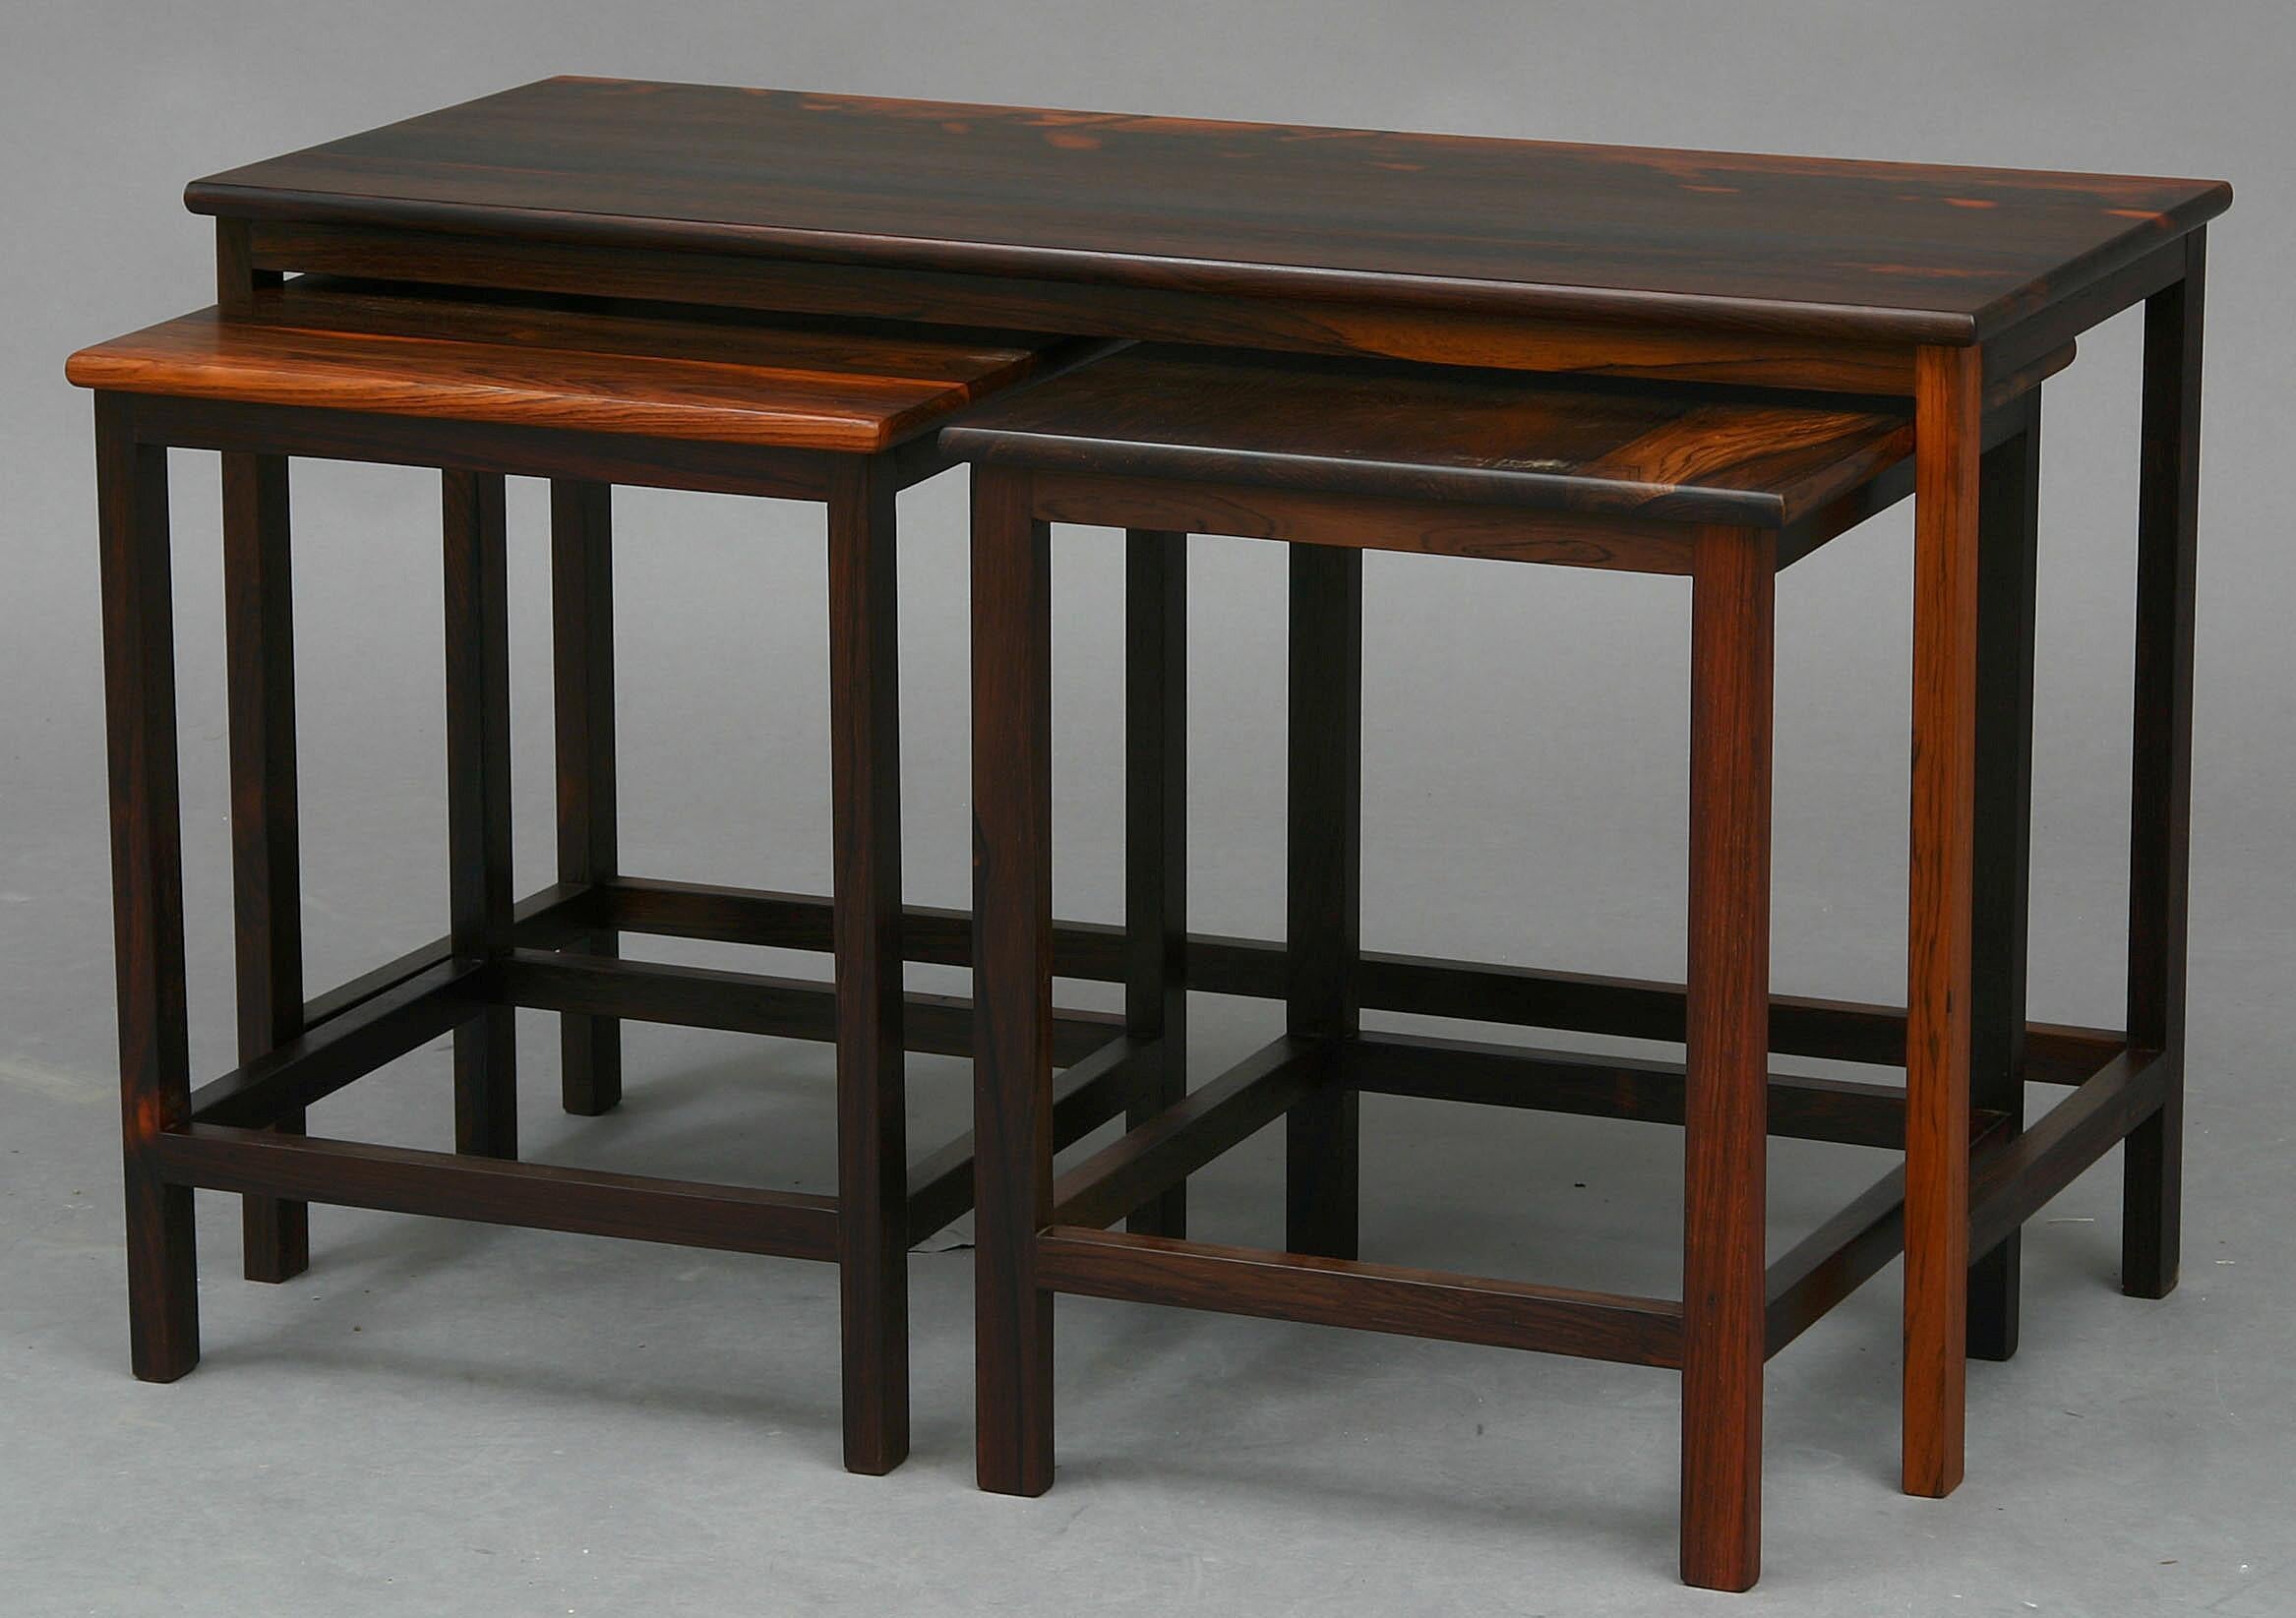 Danish furniture maker: Three nest of tables in solid rosewood. Large table H. 53. L. 87. W. 38 cm. The other tables H. 49. L. 40. W. 38 cm. (3)
